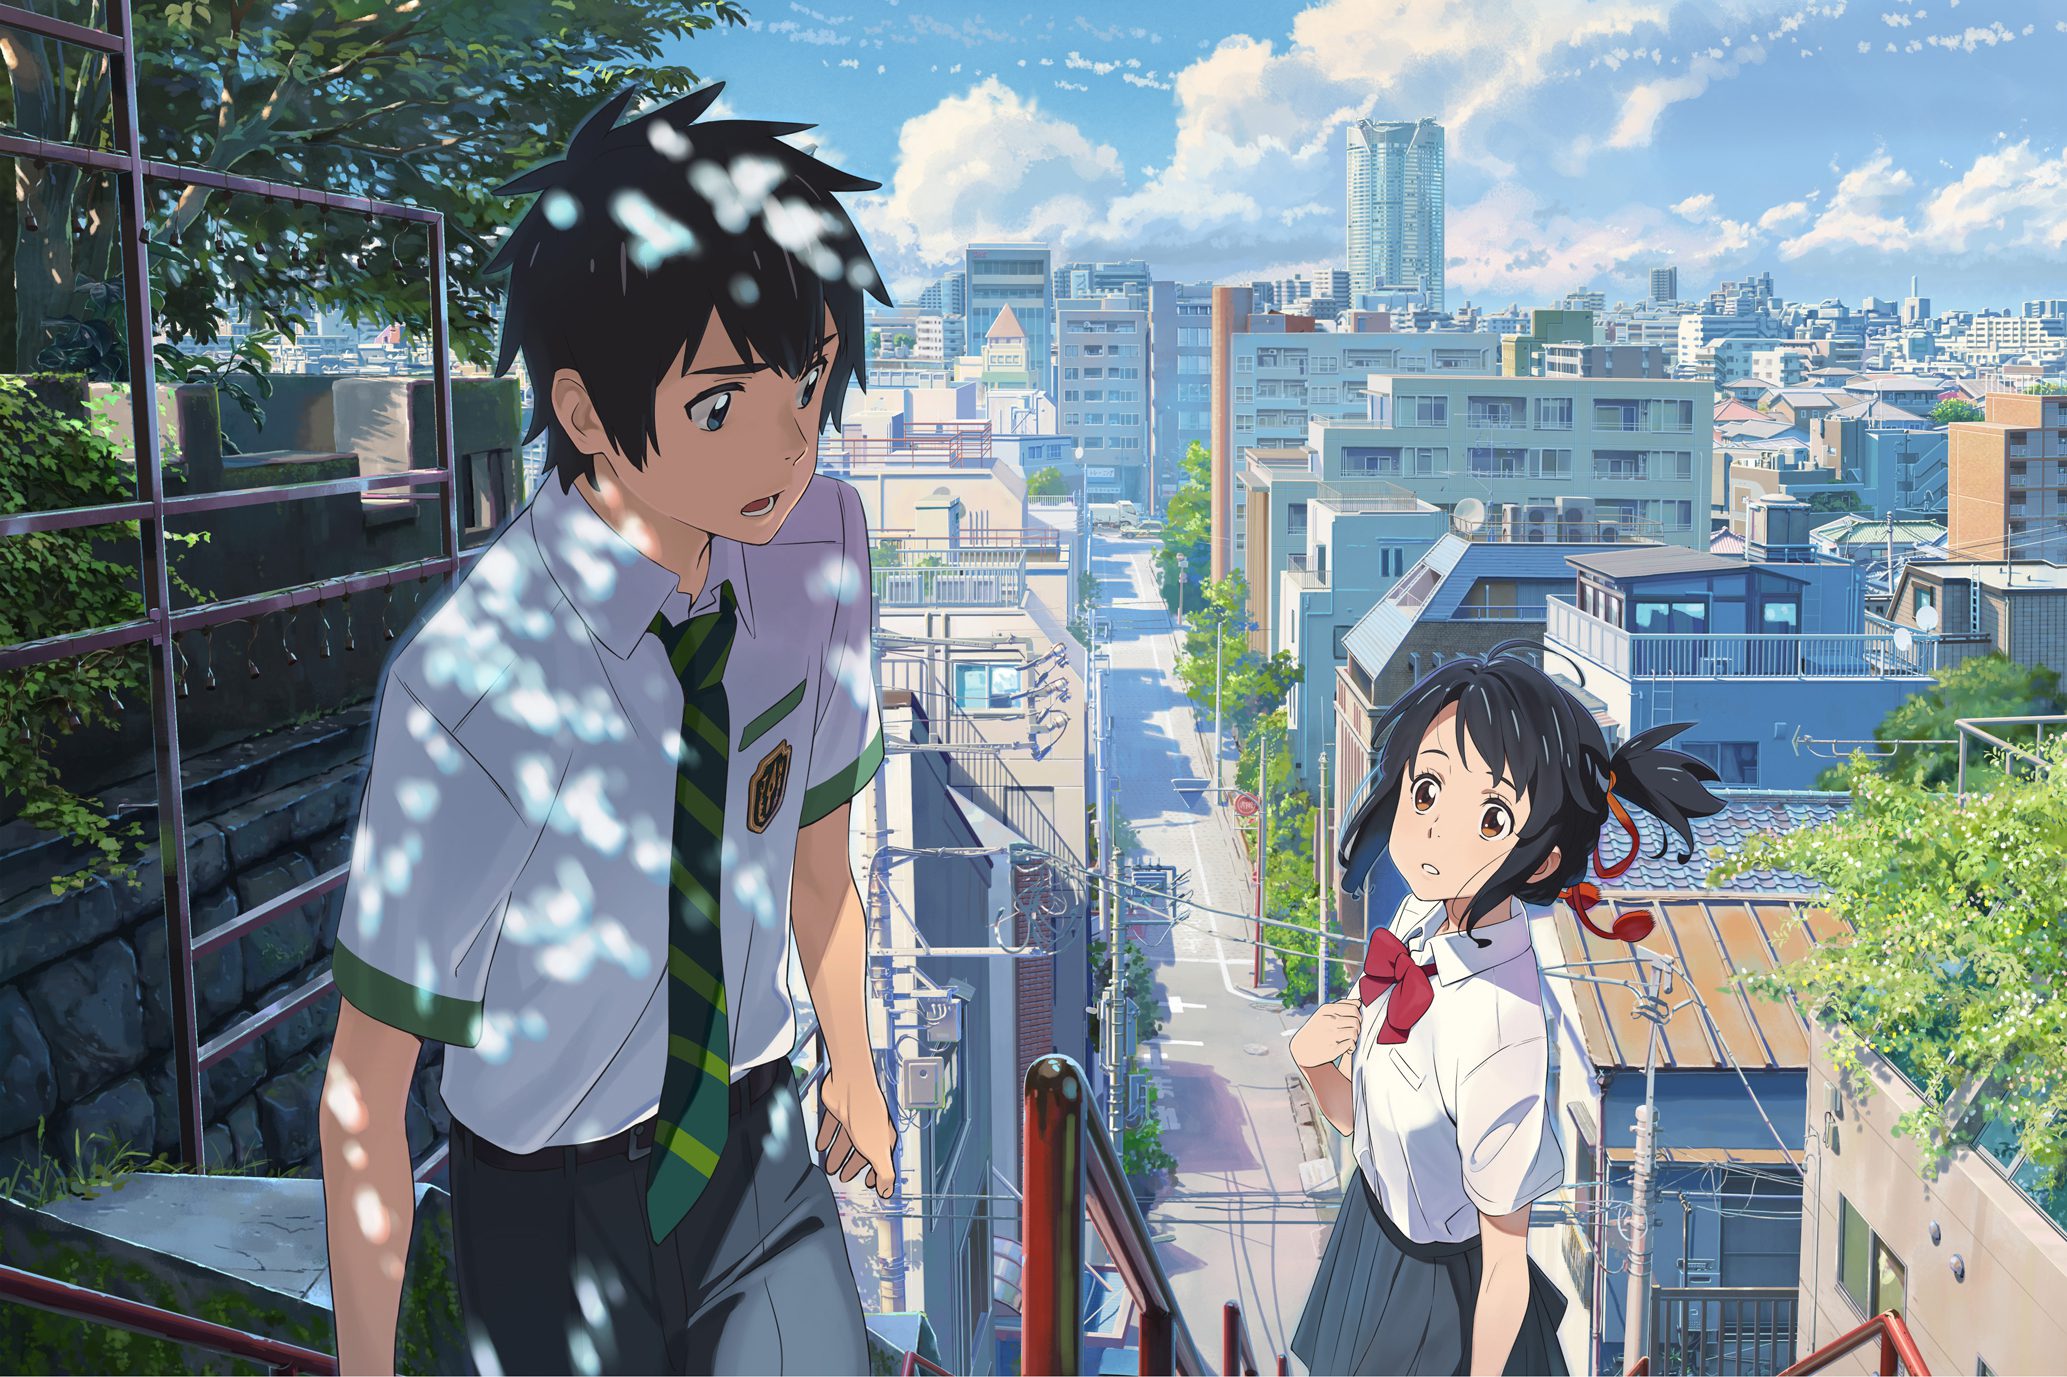 J.J. Abrams will Direct a Live-Action Adaptation of Your Name